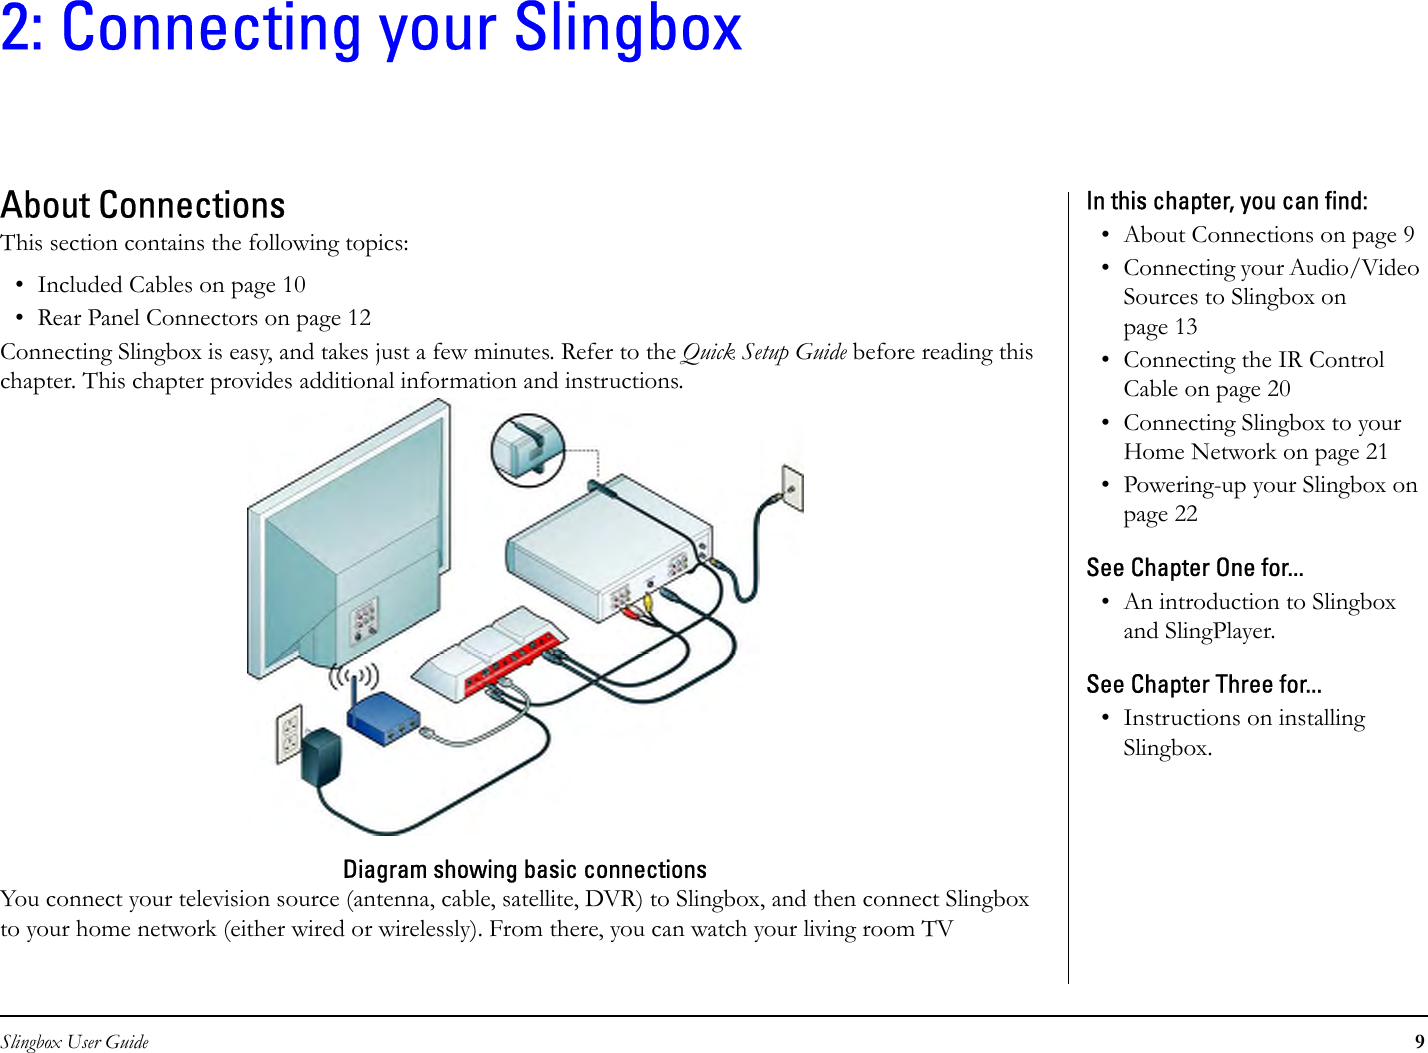 Slingbox User Guide 92: Connecting your SlingboxAbout ConnectionsThis section contains the following topics:• Included Cables on page 10• Rear Panel Connectors on page 12Connecting Slingbox is easy, and takes just a few minutes. Refer to the Quick Setup Guide before reading this chapter. This chapter provides additional information and instructions.Diagram showing basic connectionsYou connect your television source (antenna, cable, satellite, DVR) to Slingbox, and then connect Slingbox to your home network (either wired or wirelessly). From there, you can watch your living room TV In this chapter, you can find: • About Connections on page 9• Connecting your Audio/Video Sources to Slingbox on page 13• Connecting the IR Control Cable on page 20• Connecting Slingbox to your Home Network on page 21• Powering-up your Slingbox on page 22See Chapter One for...• An introduction to Slingbox and SlingPlayer. See Chapter Three for...• Instructions on installing Slingbox.